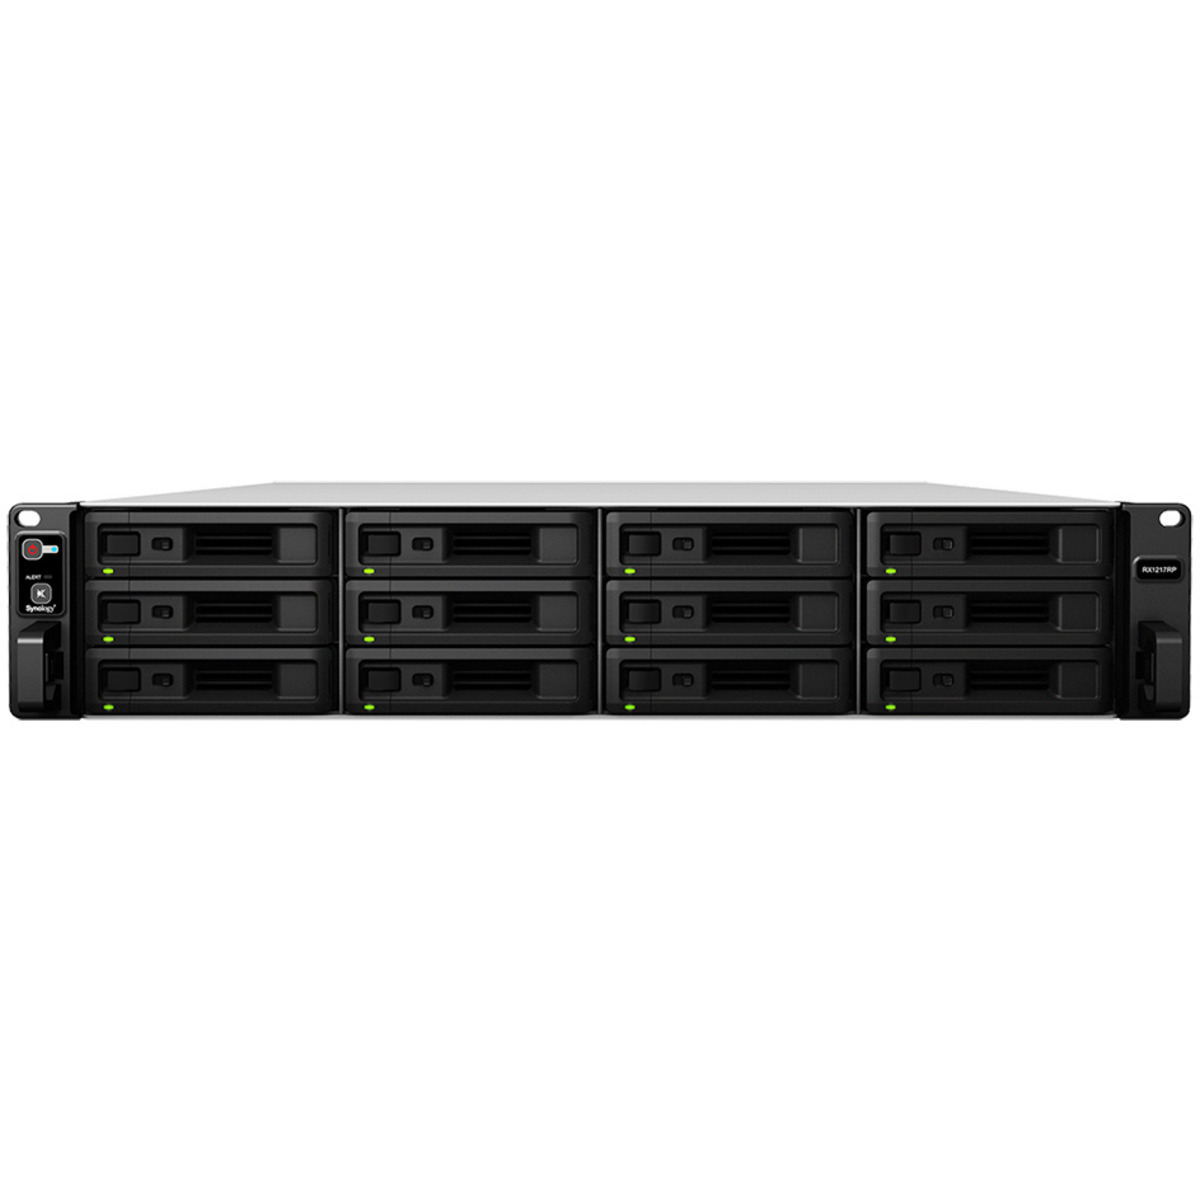 Synology RX1217 External Expansion Drive 24tb 12-Bay RackMount Large Business / Enterprise Expansion Enclosure 12x2tb Western Digital Red SA500 WDS200T1R0A 2.5 560/530MB/s SATA 6Gb/s SSD NAS Class Drives Installed - Burn-In Tested RX1217 External Expansion Drive